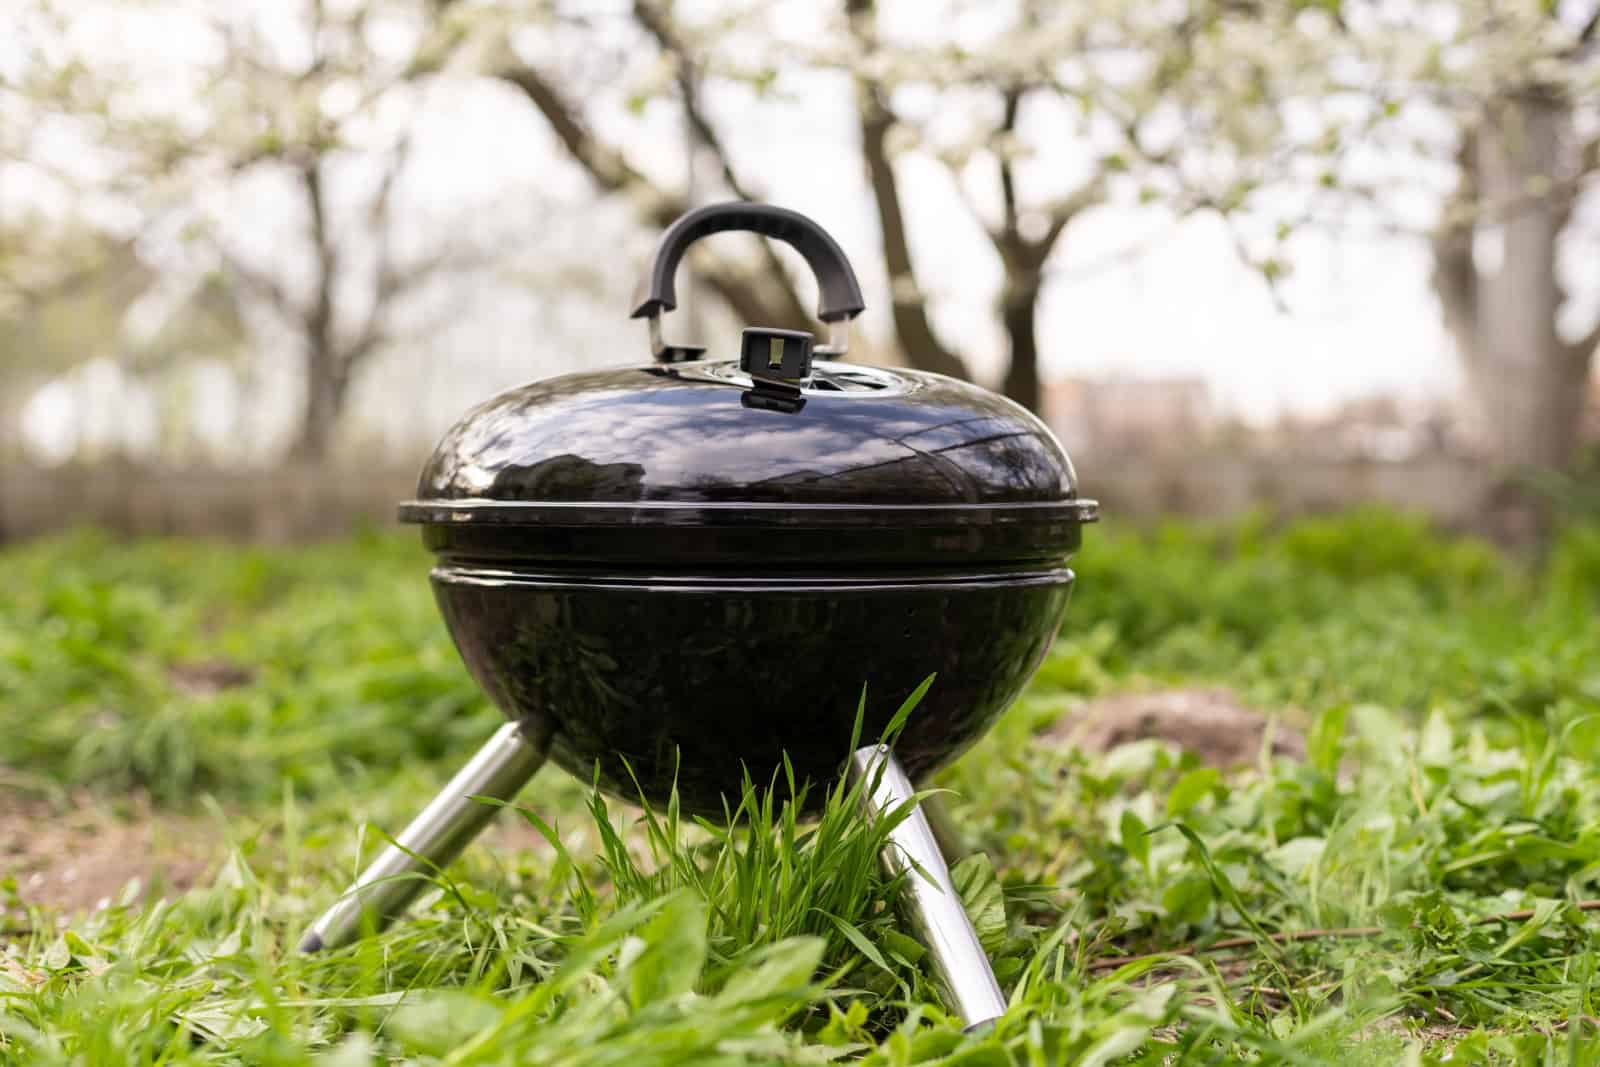 An empty barbecue grill stands in the yard